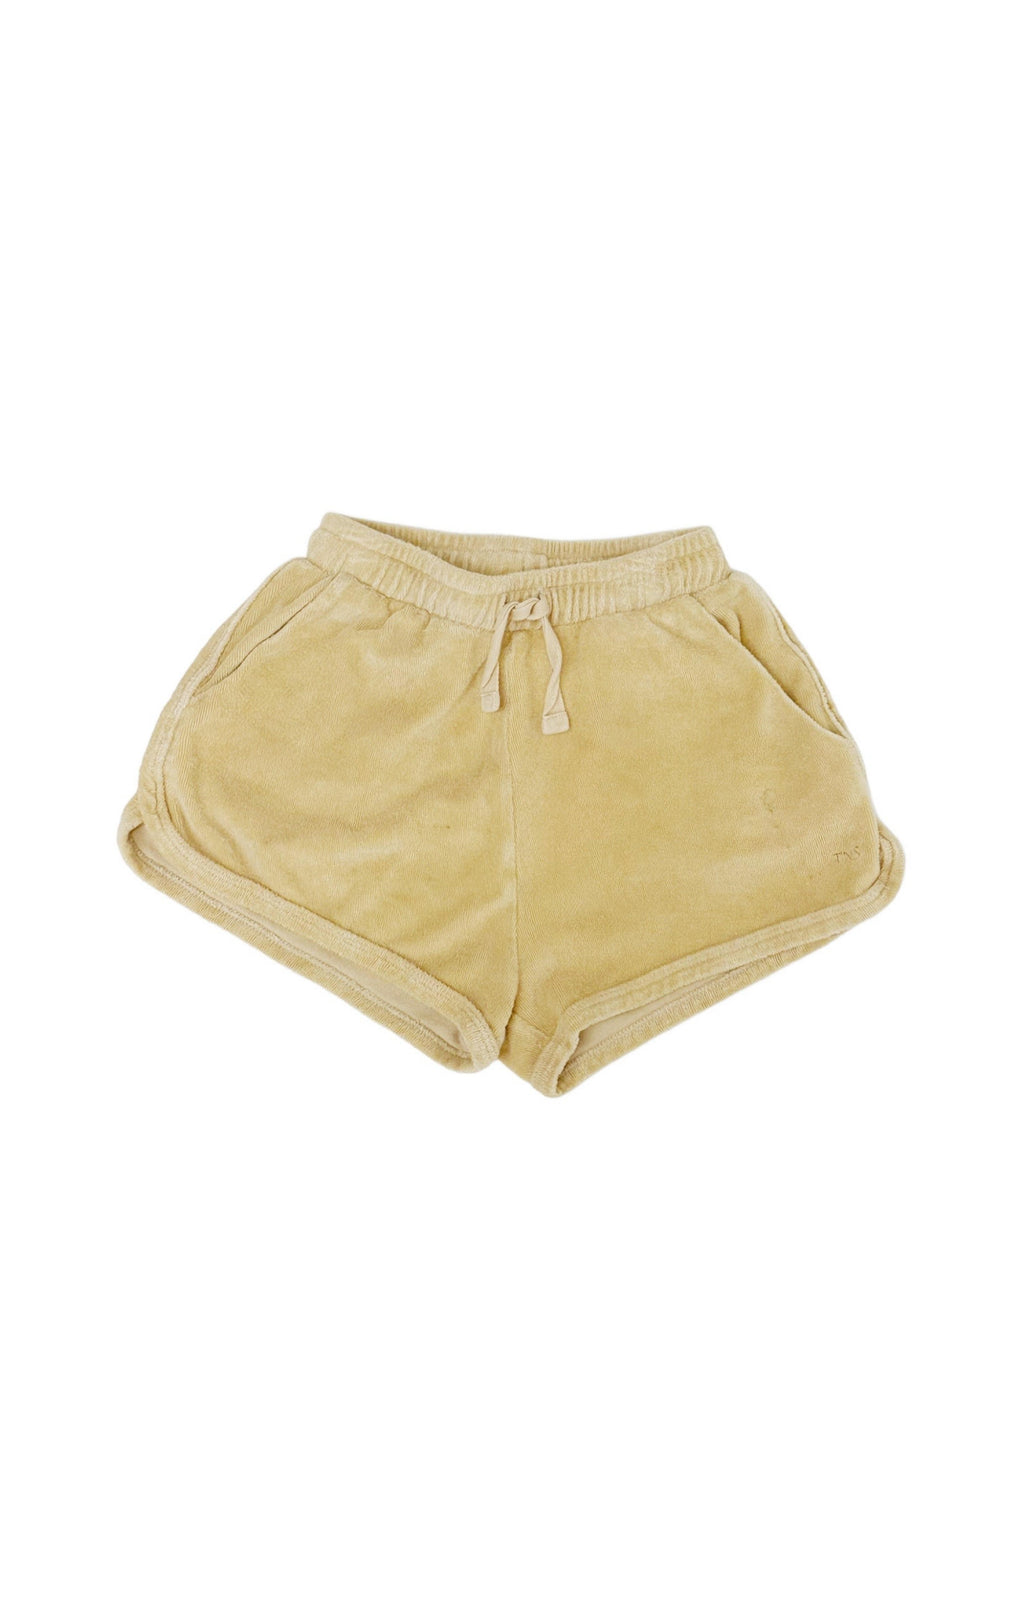 THE NEW SOCIETY Shorts Size: 4 Years